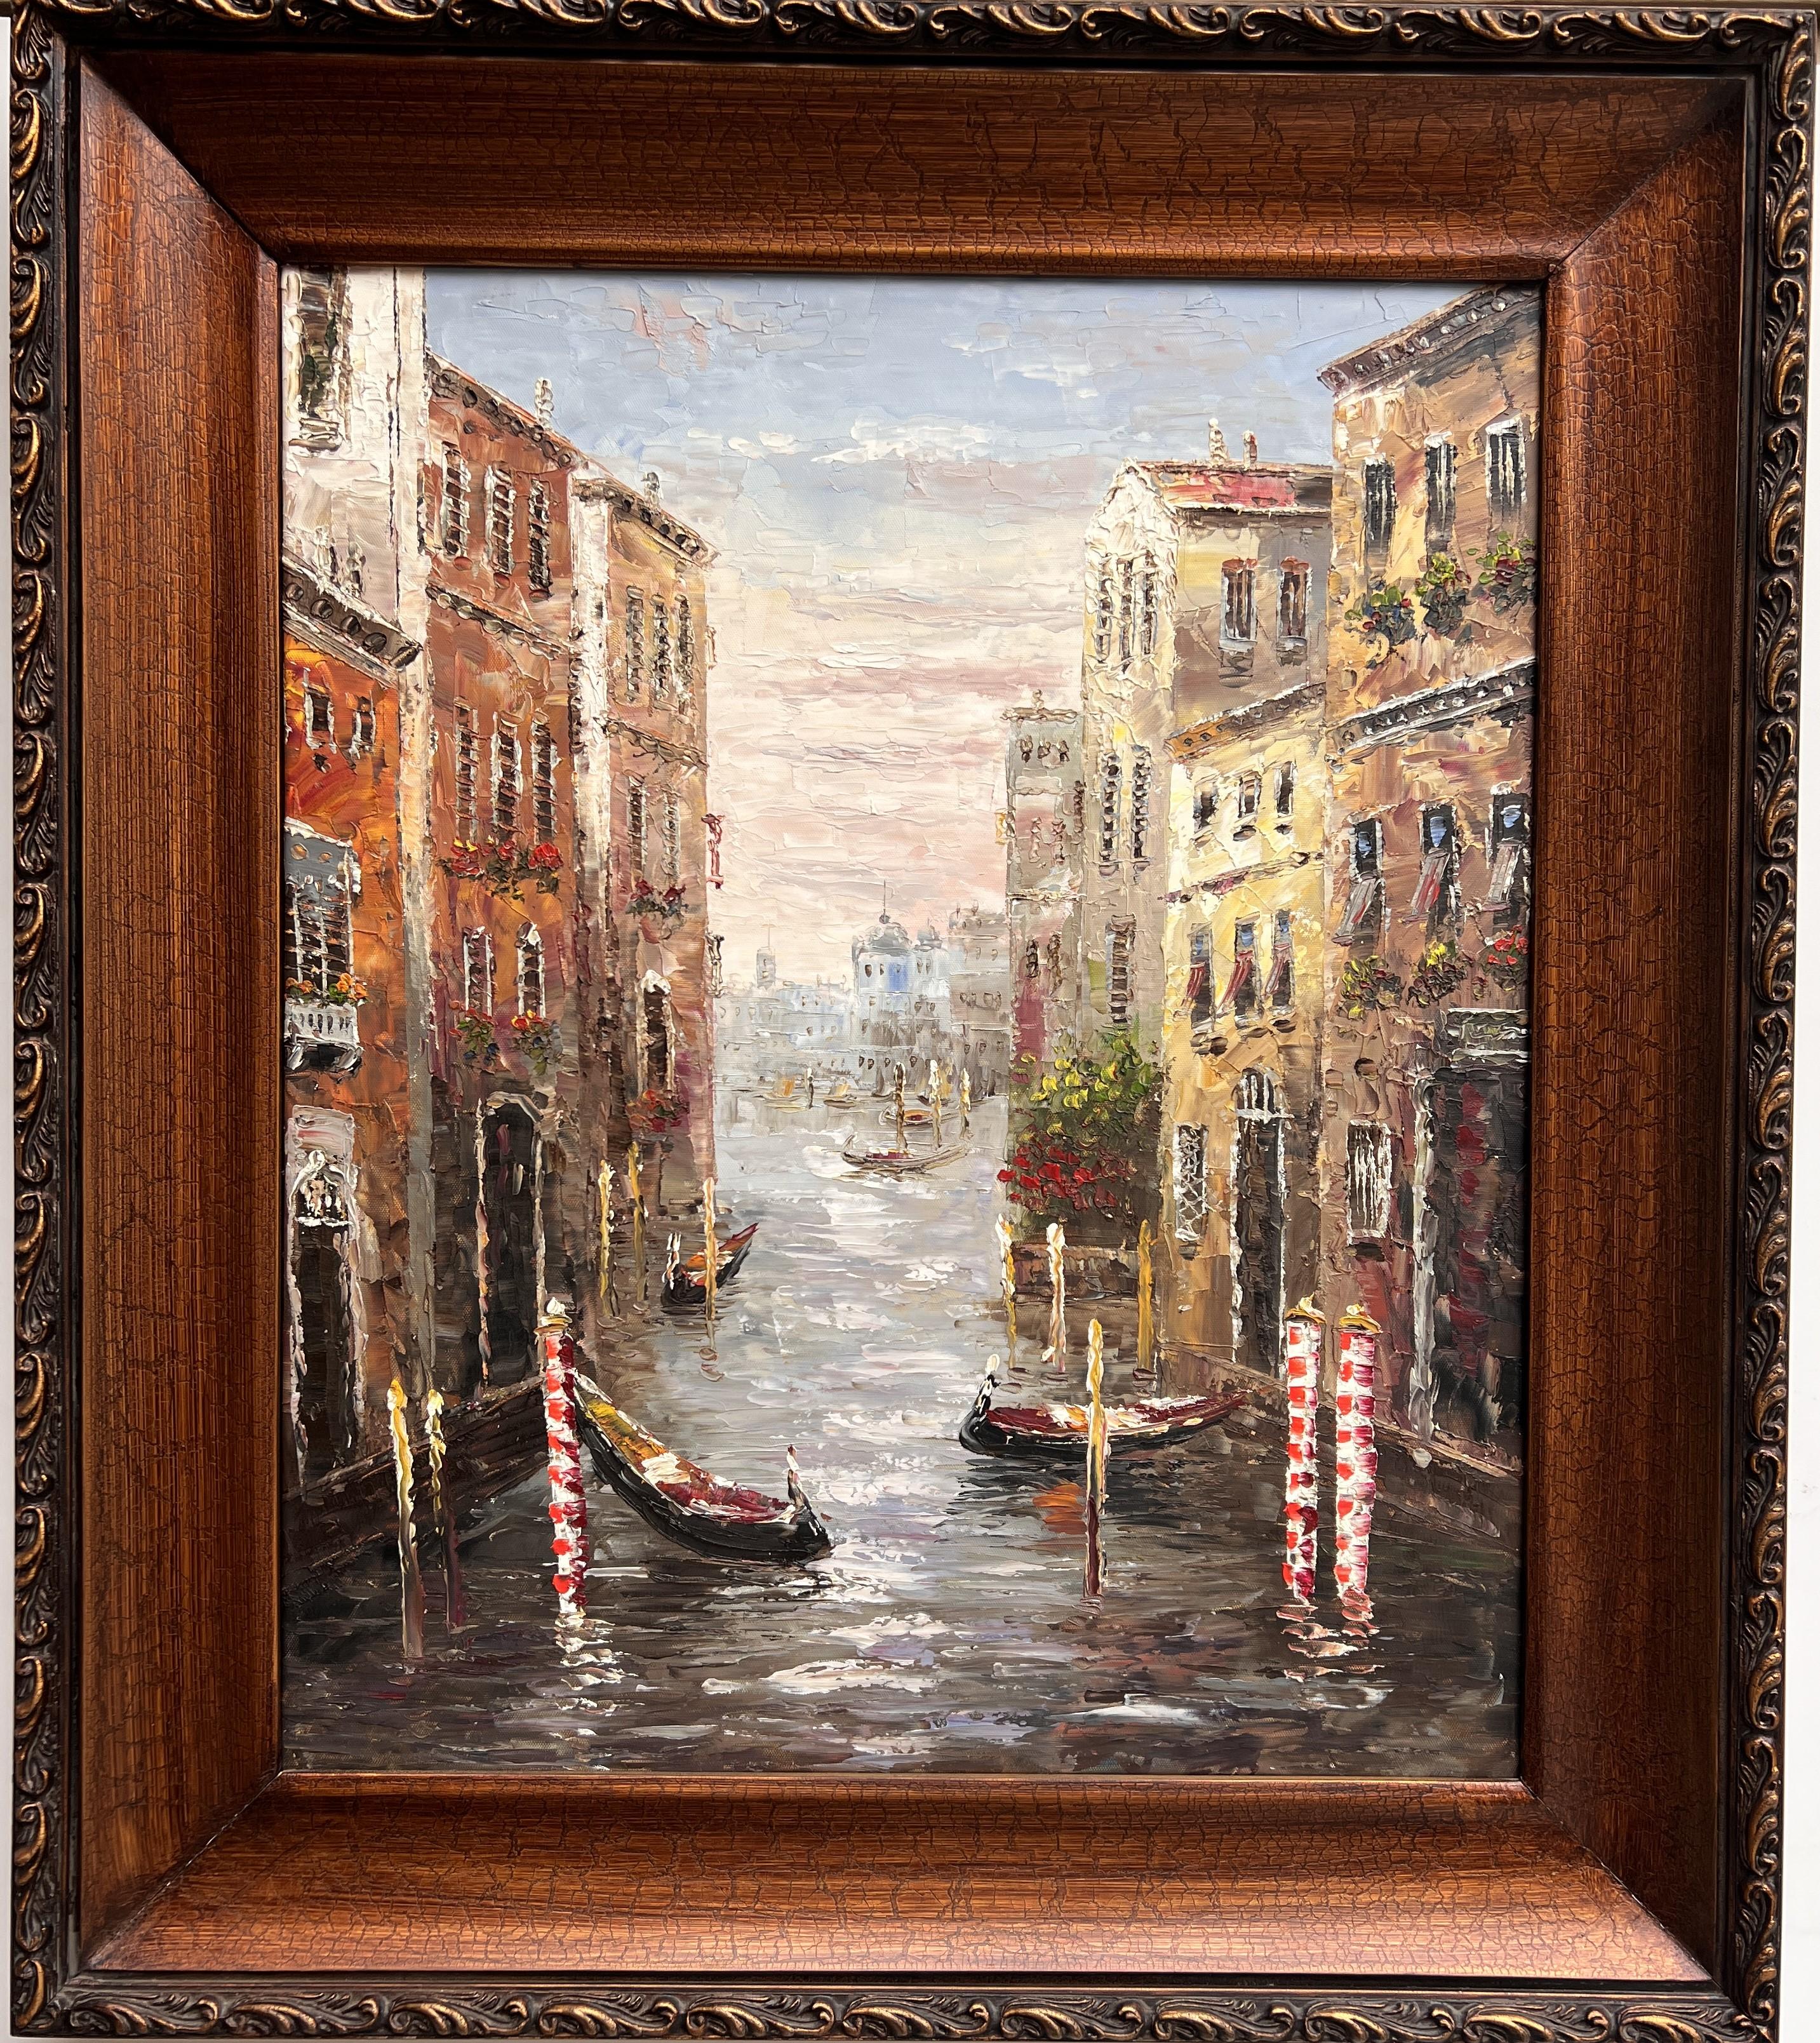 Unknown Landscape Painting - Original Oil painting on canvas, Italy, Venice, Canal view, Framed